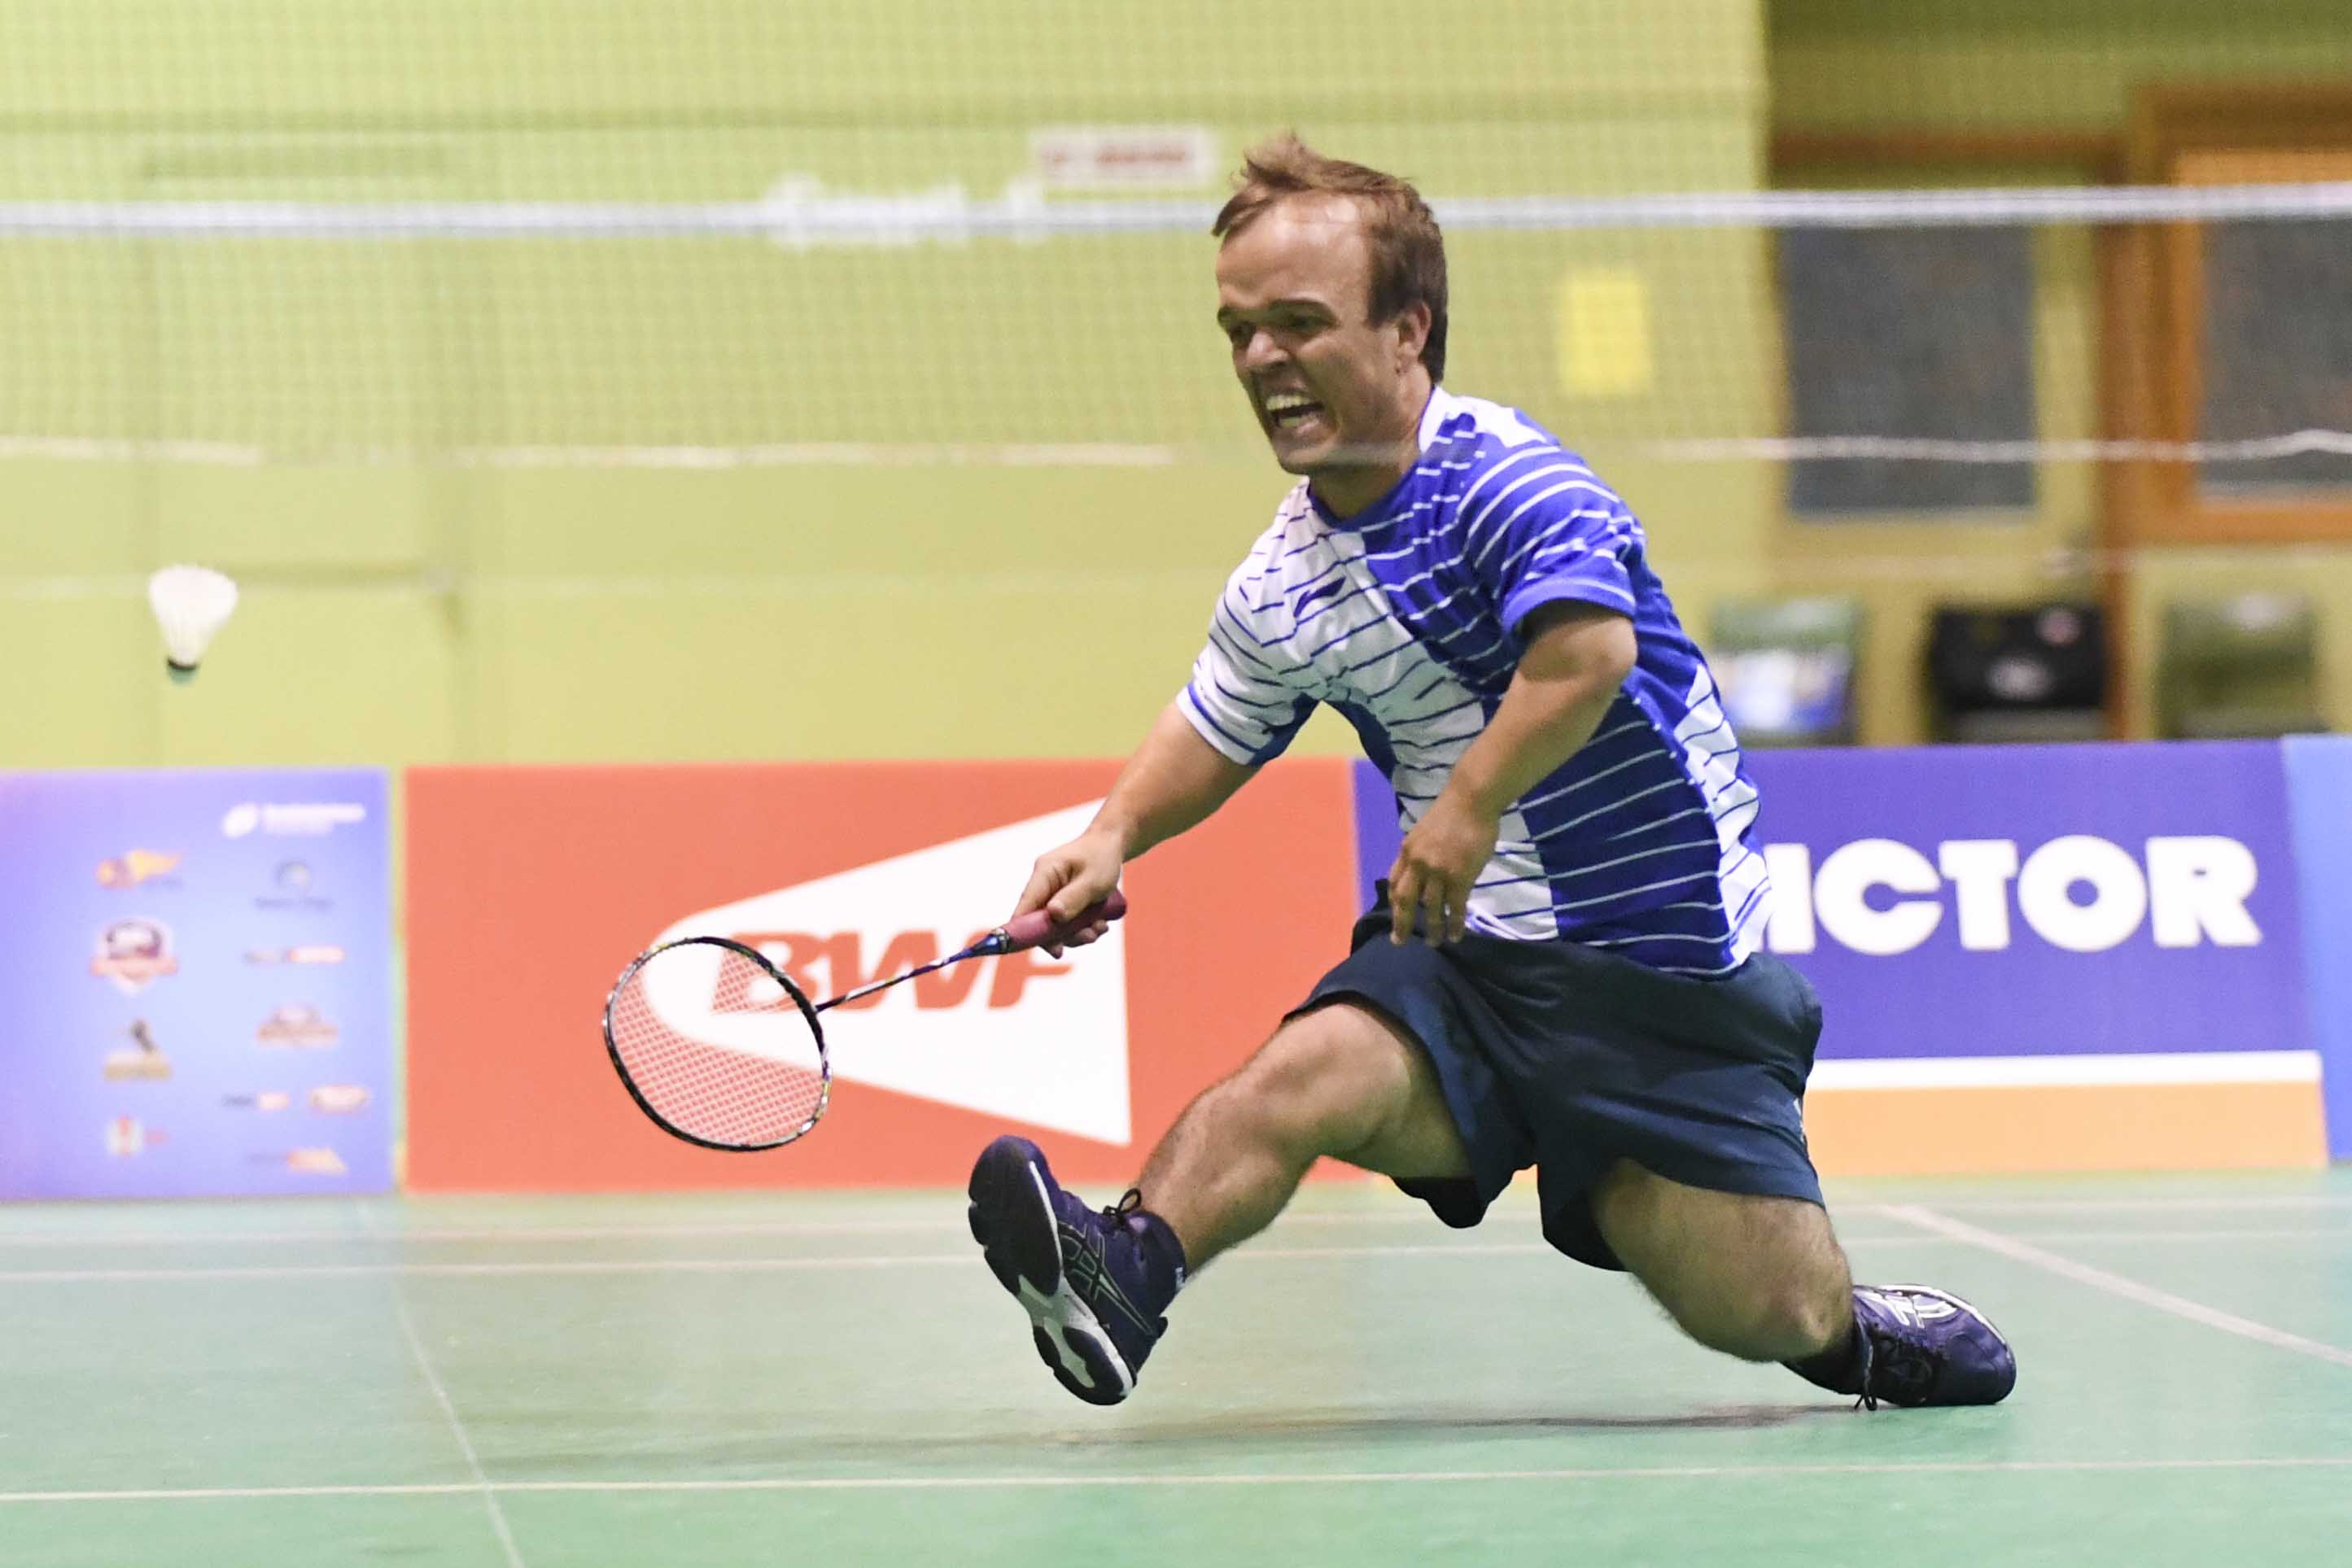 Para-Badminton Player, Luke Missen, excited to see the two World Championships combine in Switzerland